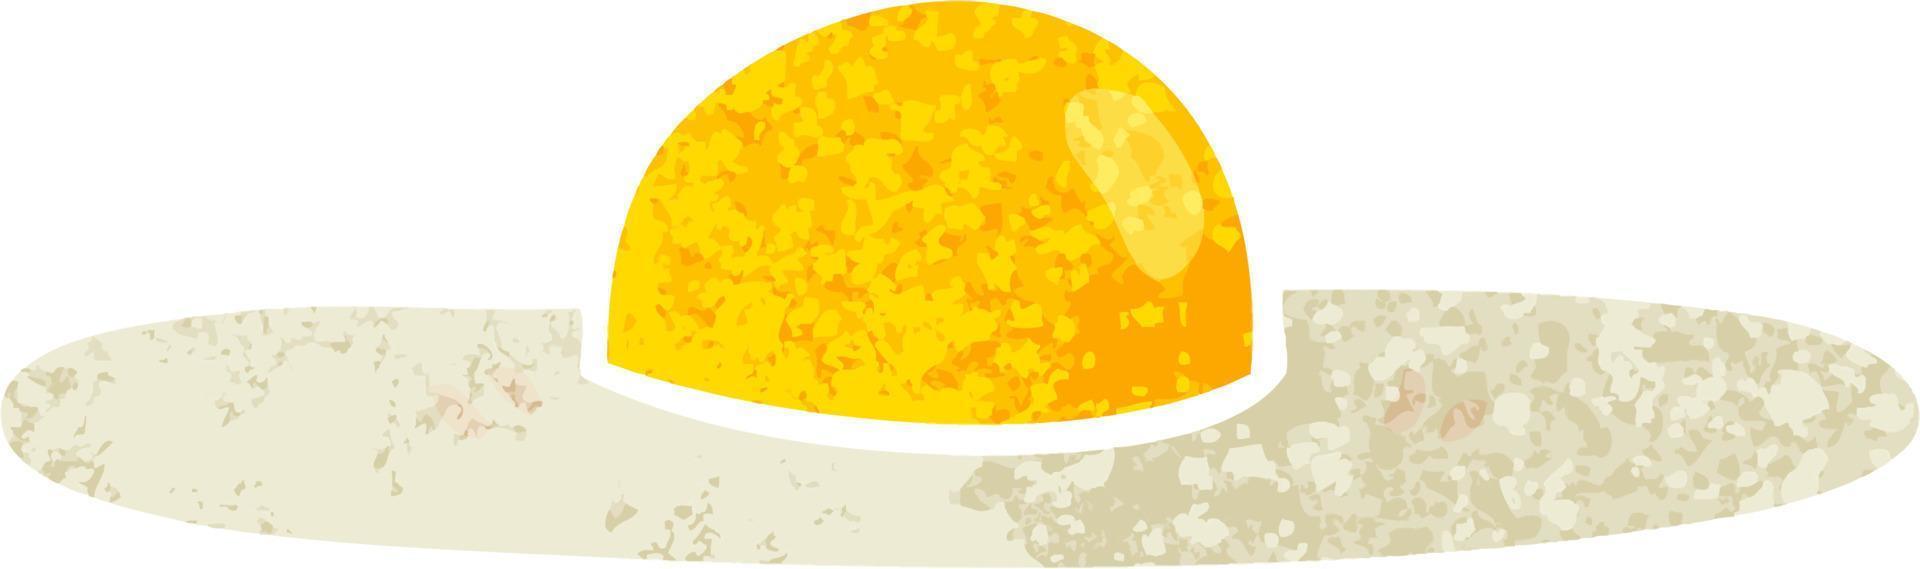 quirky retro illustration style cartoon fried egg vector